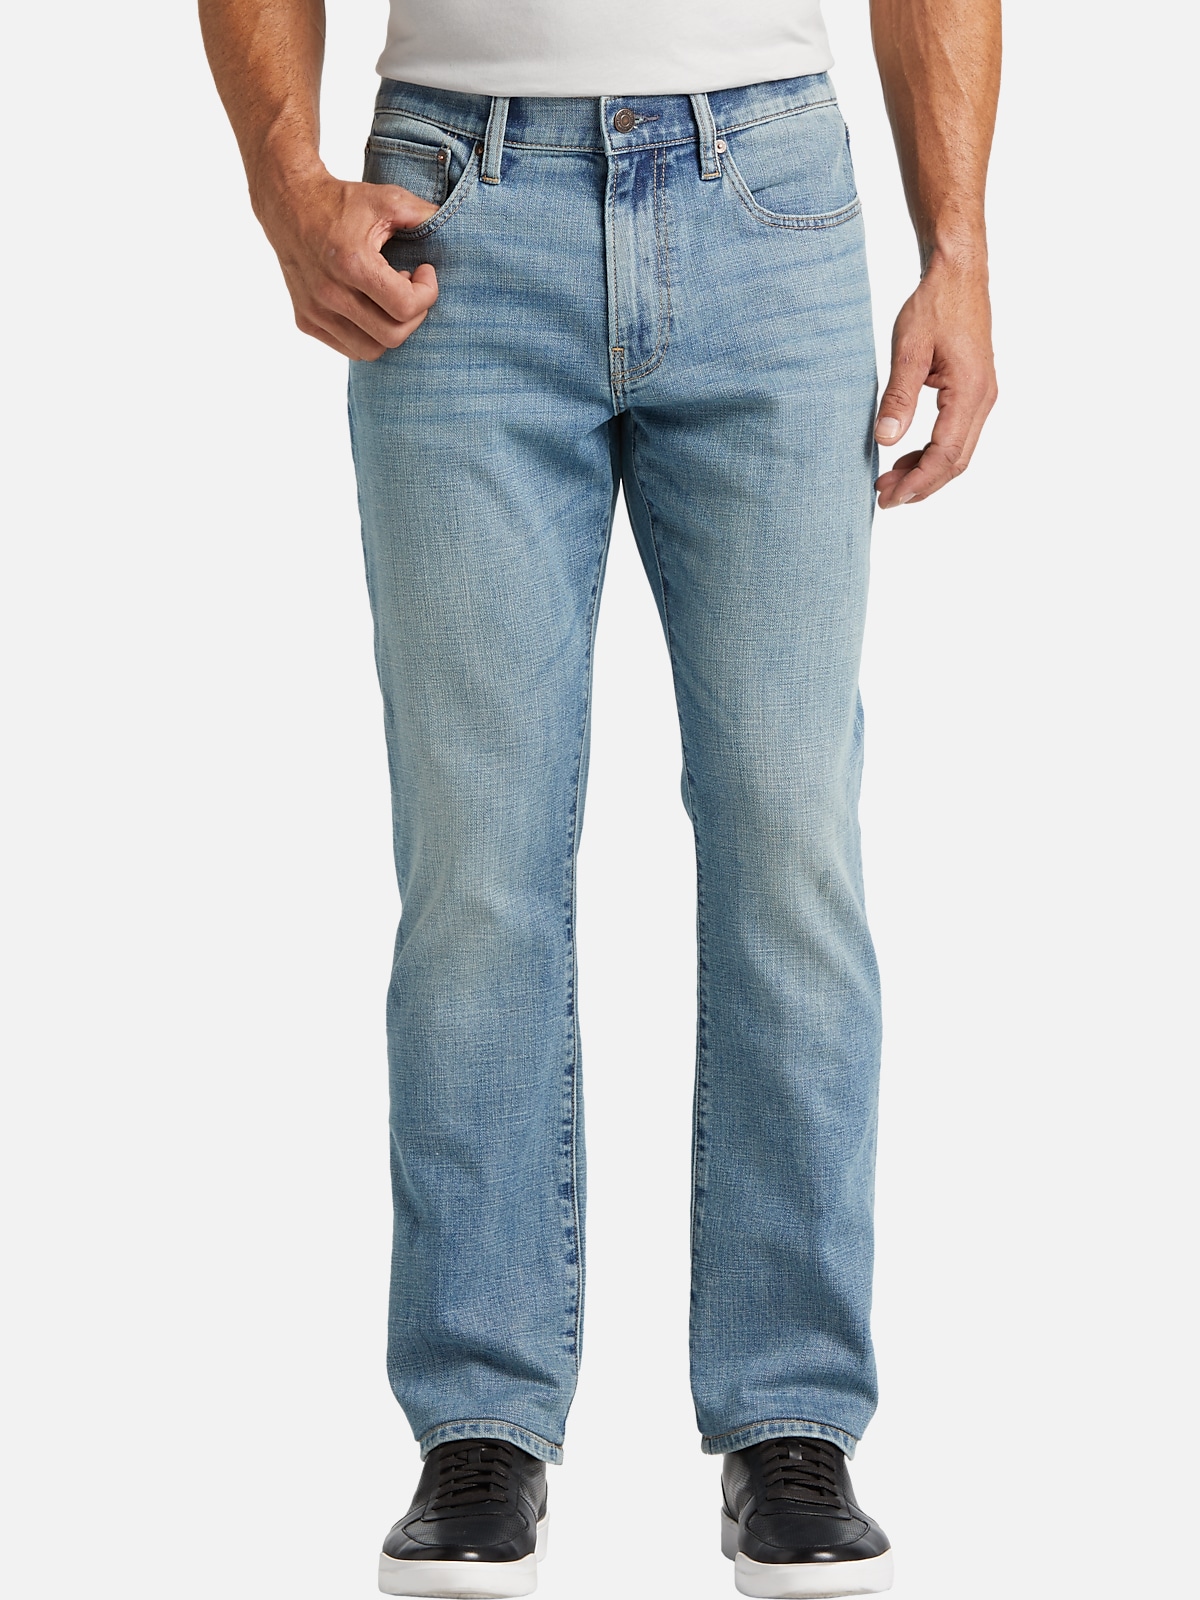 https://image.menswearhouse.com/is/image/TMW/TMW_22ZF_57_LUCKY_BRAND_JEANS_LIGHT_DISTRESSED_MAIN?imPolicy=pdp-zoom-mob